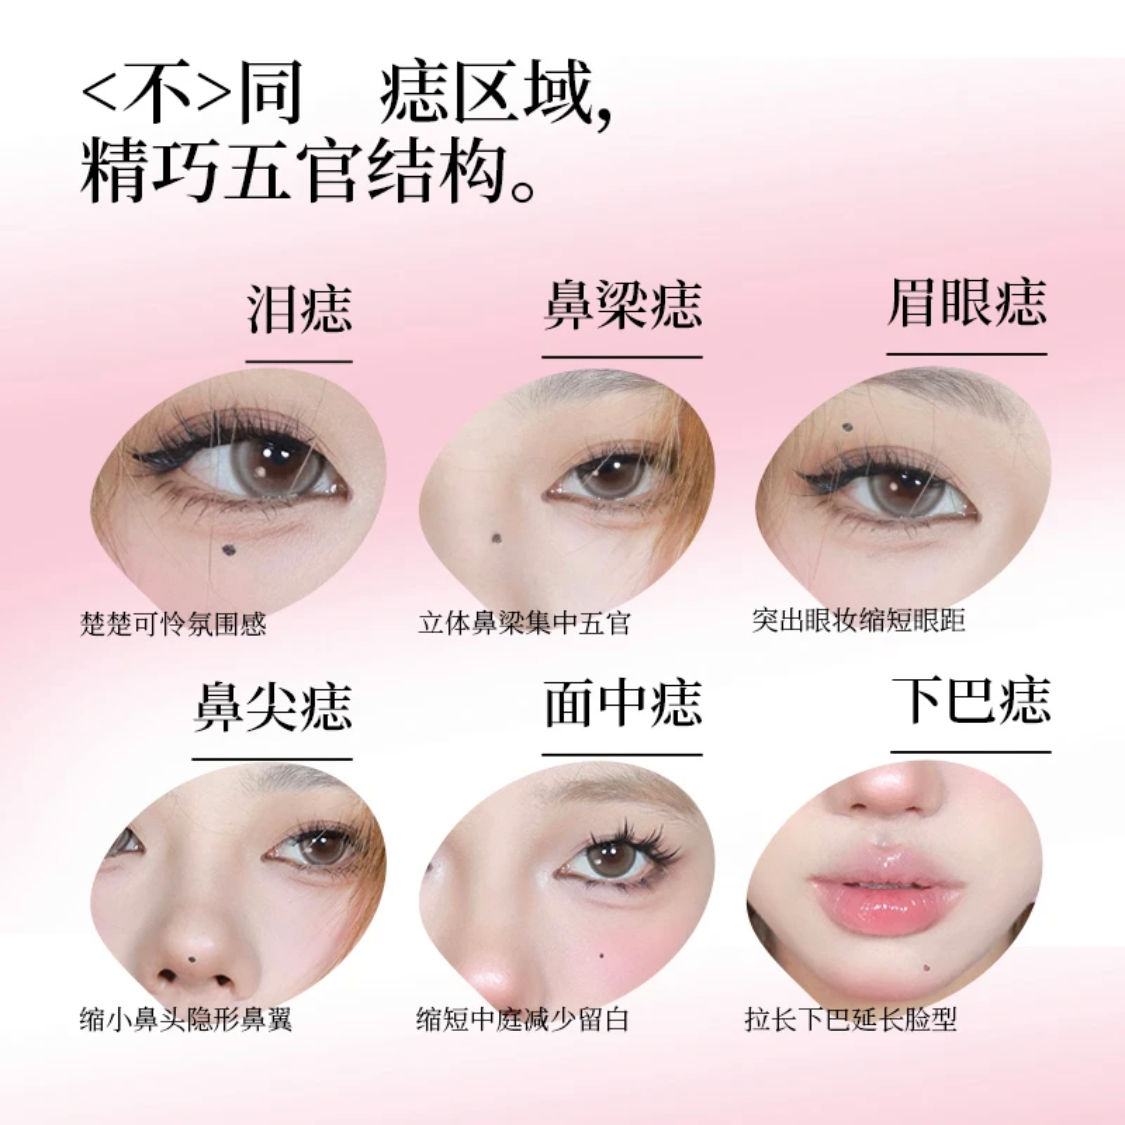 MZYZ spot mole pen tear mole pen is waterproof, long-lasting and does not smudge to modify the corners of the eyes, beauty moles and freckles, natural color development for novices